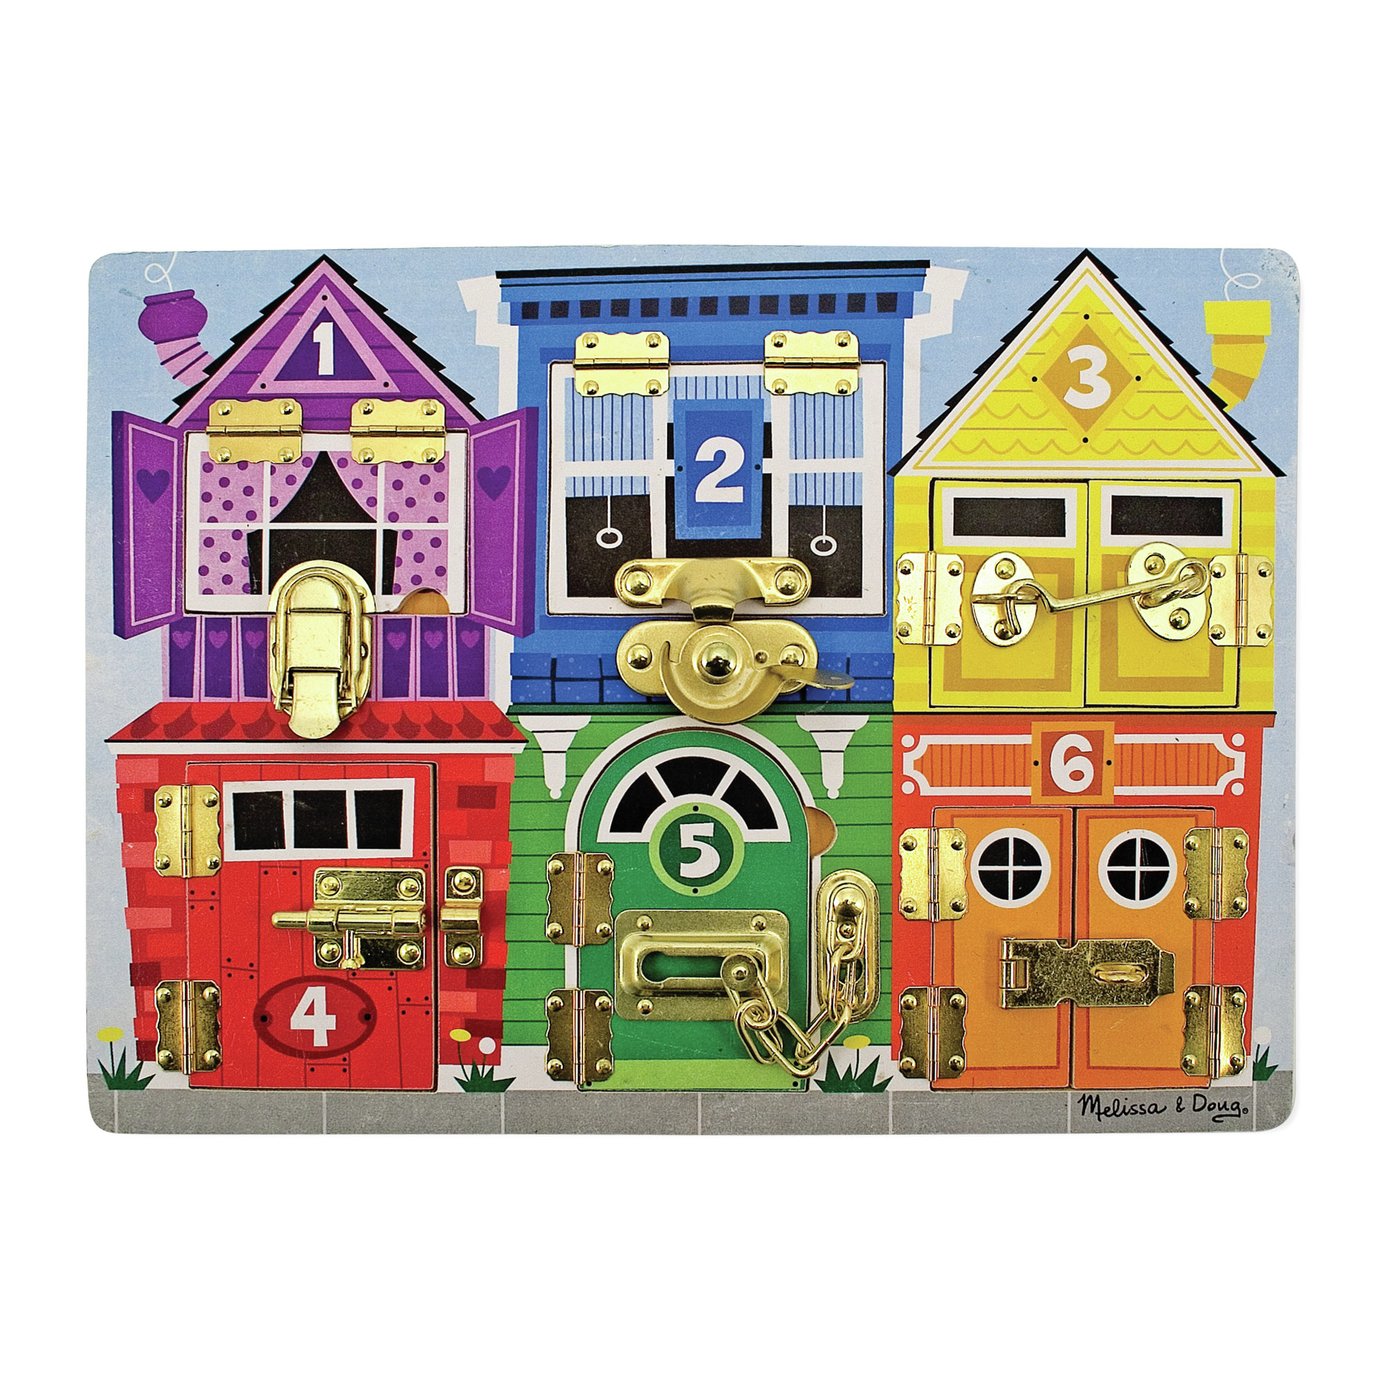 Melissa & Doug Latches Board review